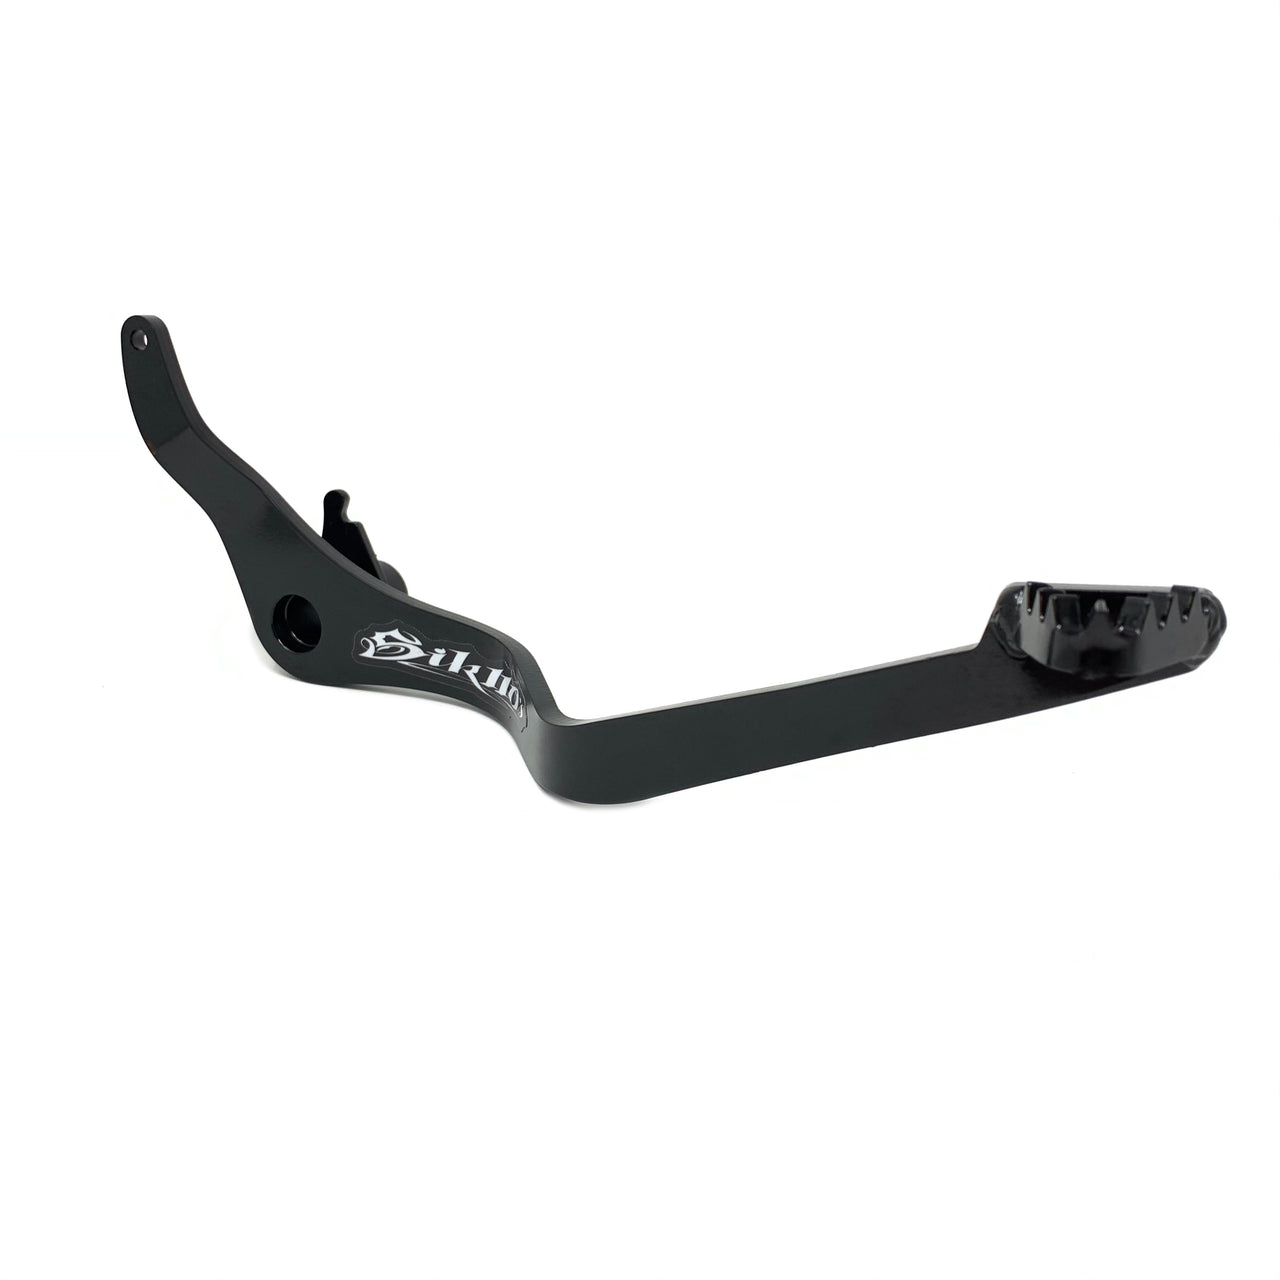 Sik110 Extended HD Brake Pedal - CRF110